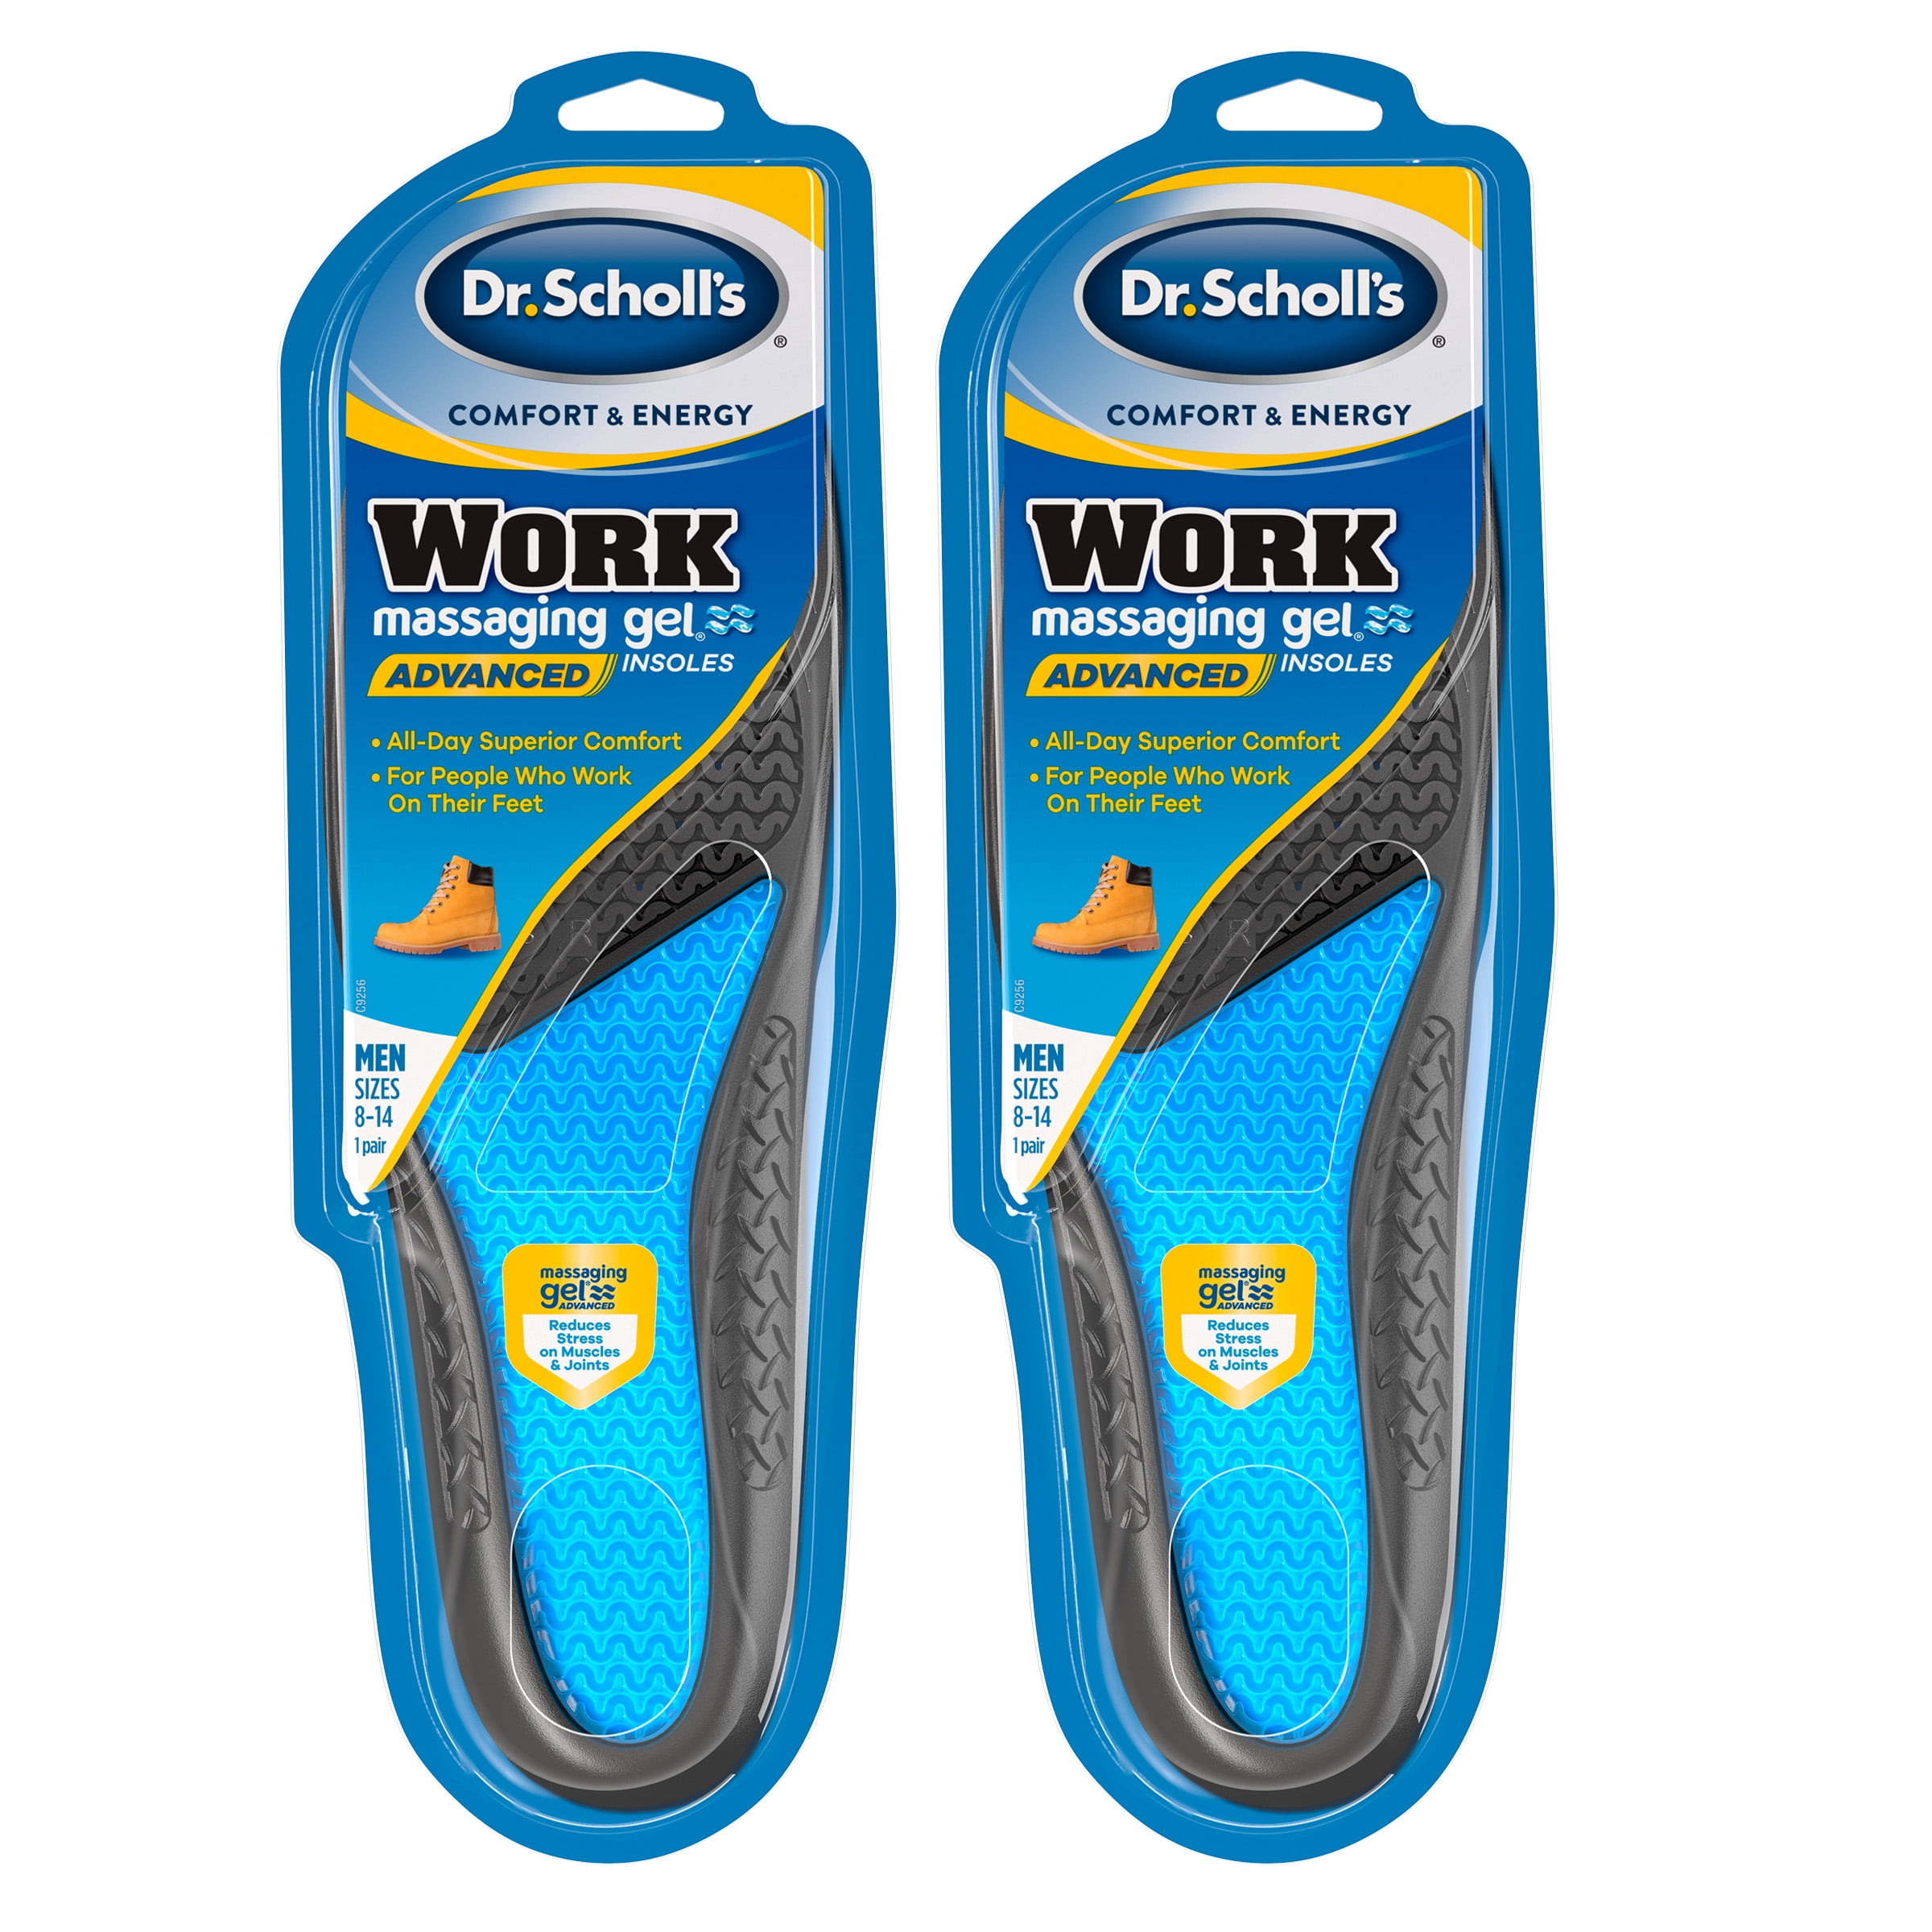 UK Size 7 to 12 Scholl’s Double Insole Bundle UK Size 7 to 12 Scholl Men’s Gel Activ Work Insoles Scholl Men’s Gel Activ Sport Insoles 